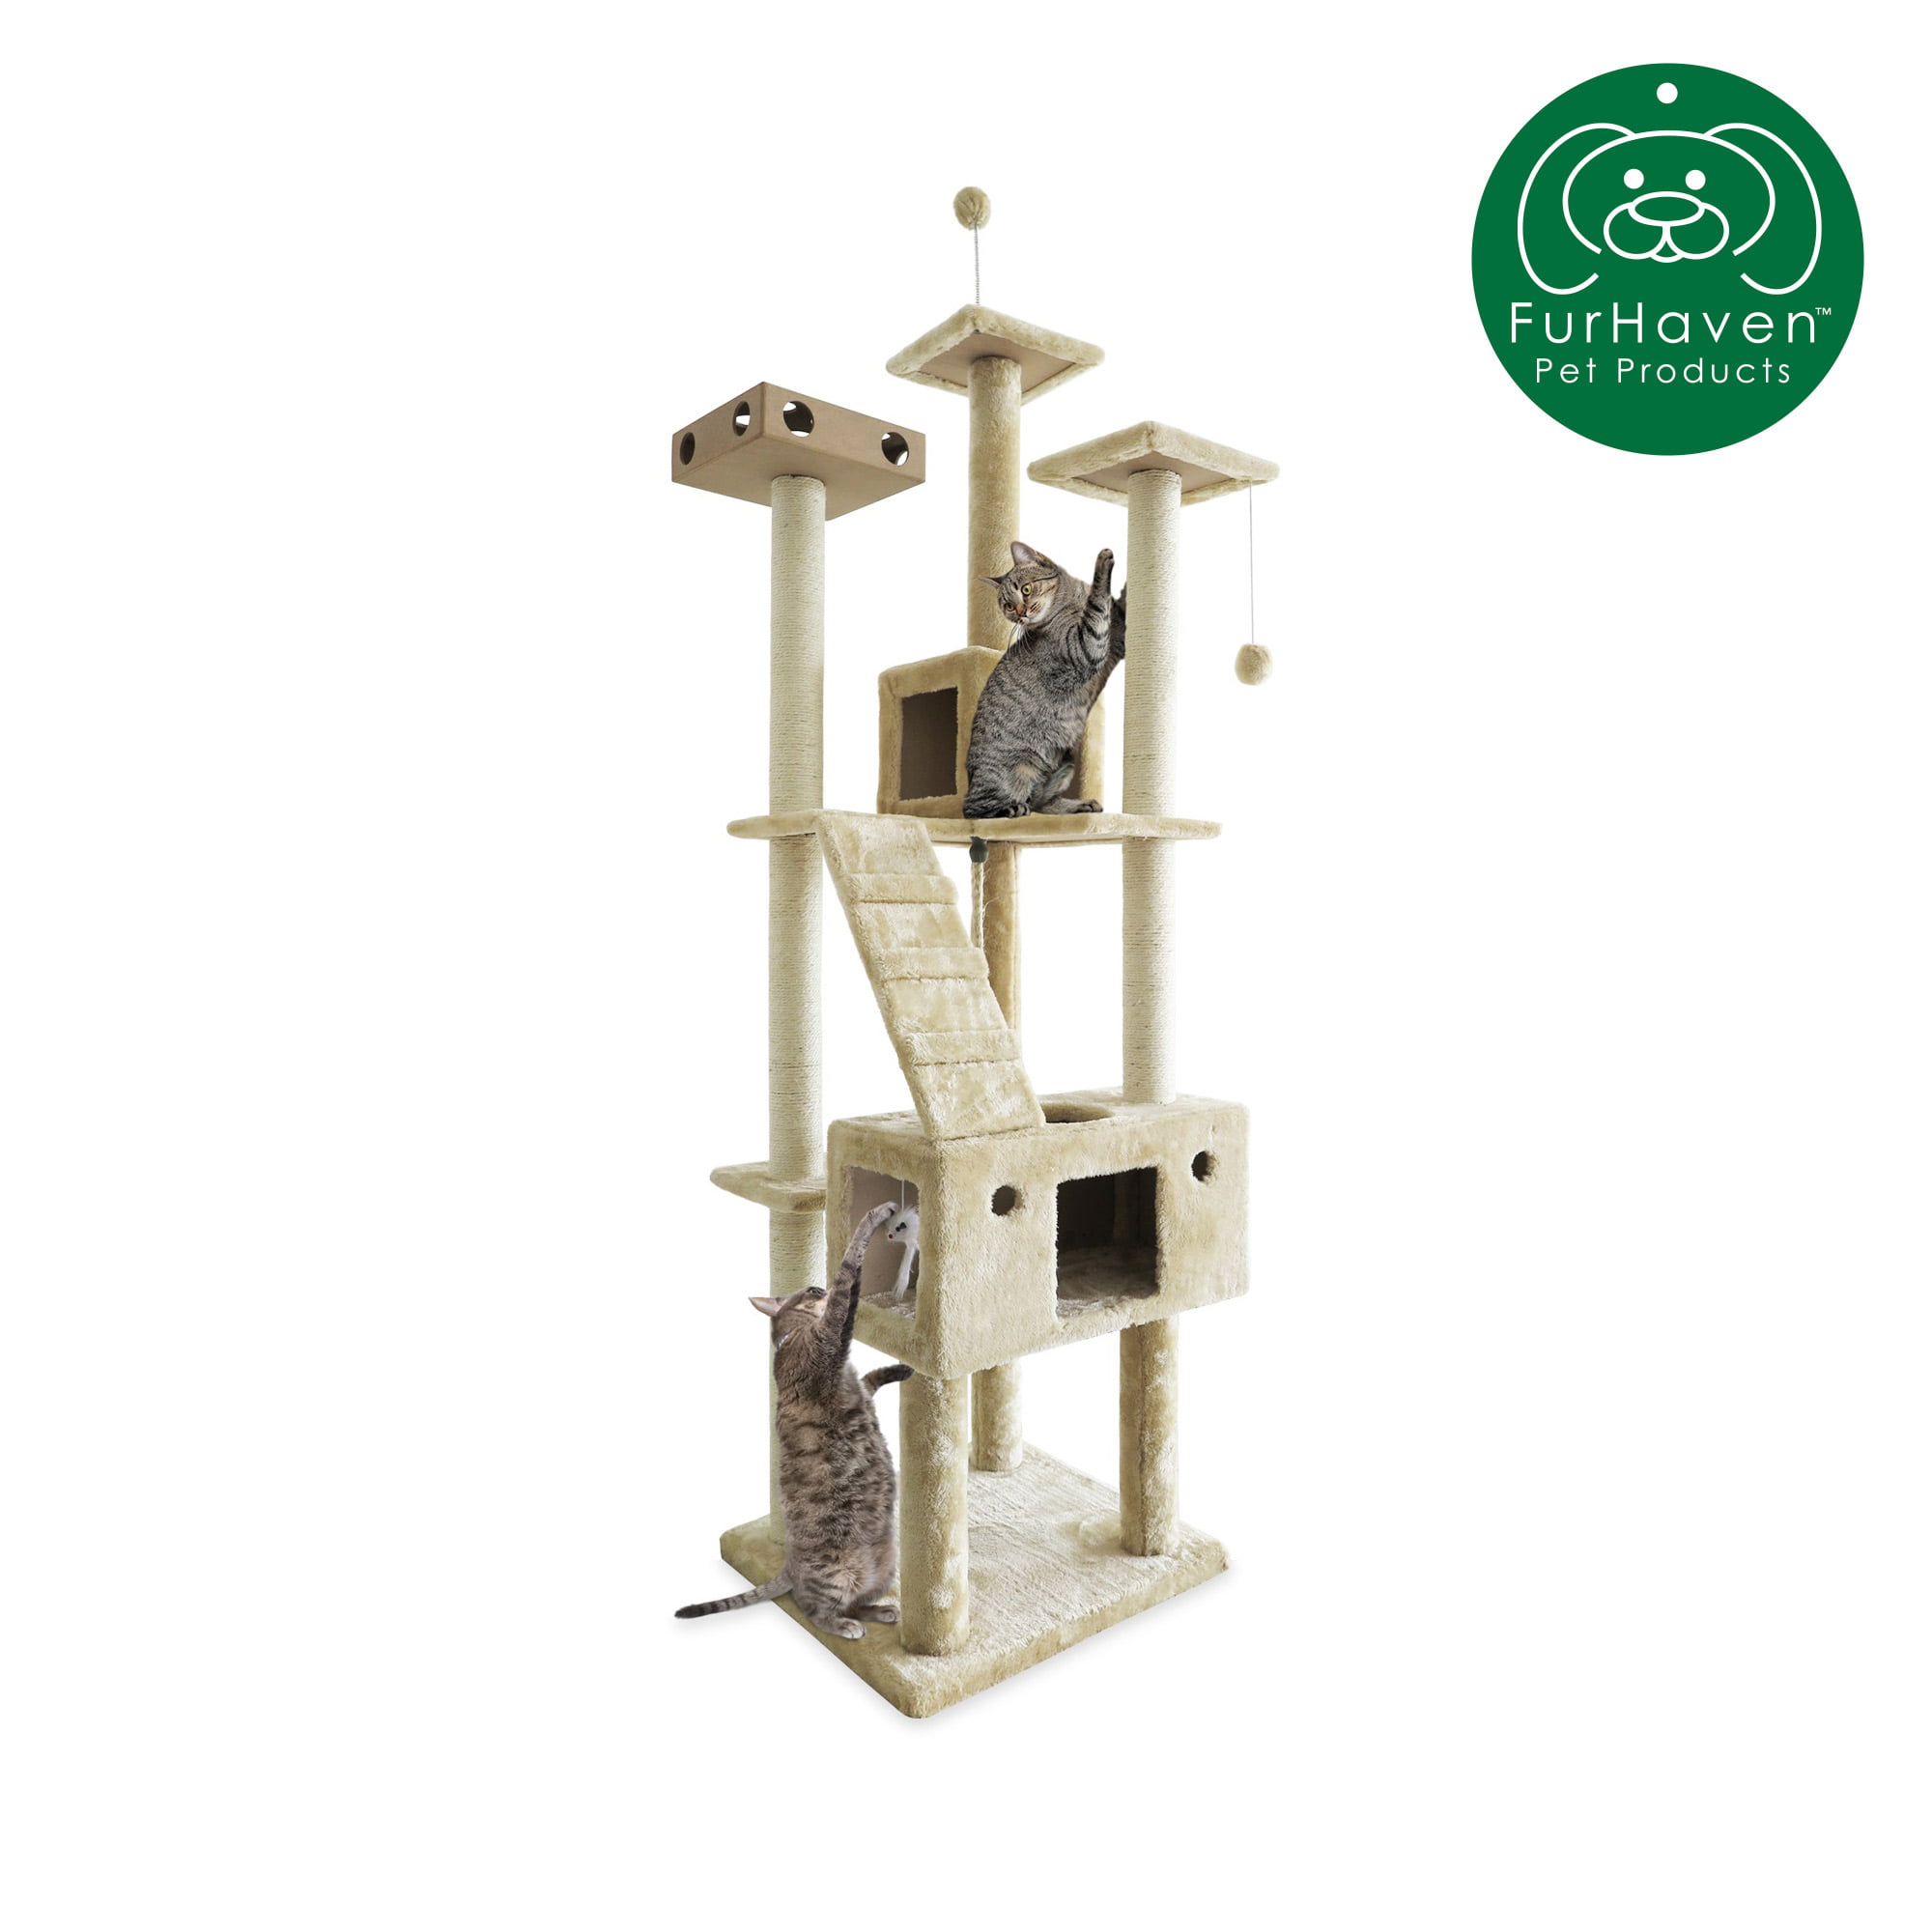 Furhaven Pet Cat Furniture Tiger Tough Fuzz Ball Hanging Toy Cat Scratcher Post Entertainment Cat Tree Playground for Cats & Kittens Blue